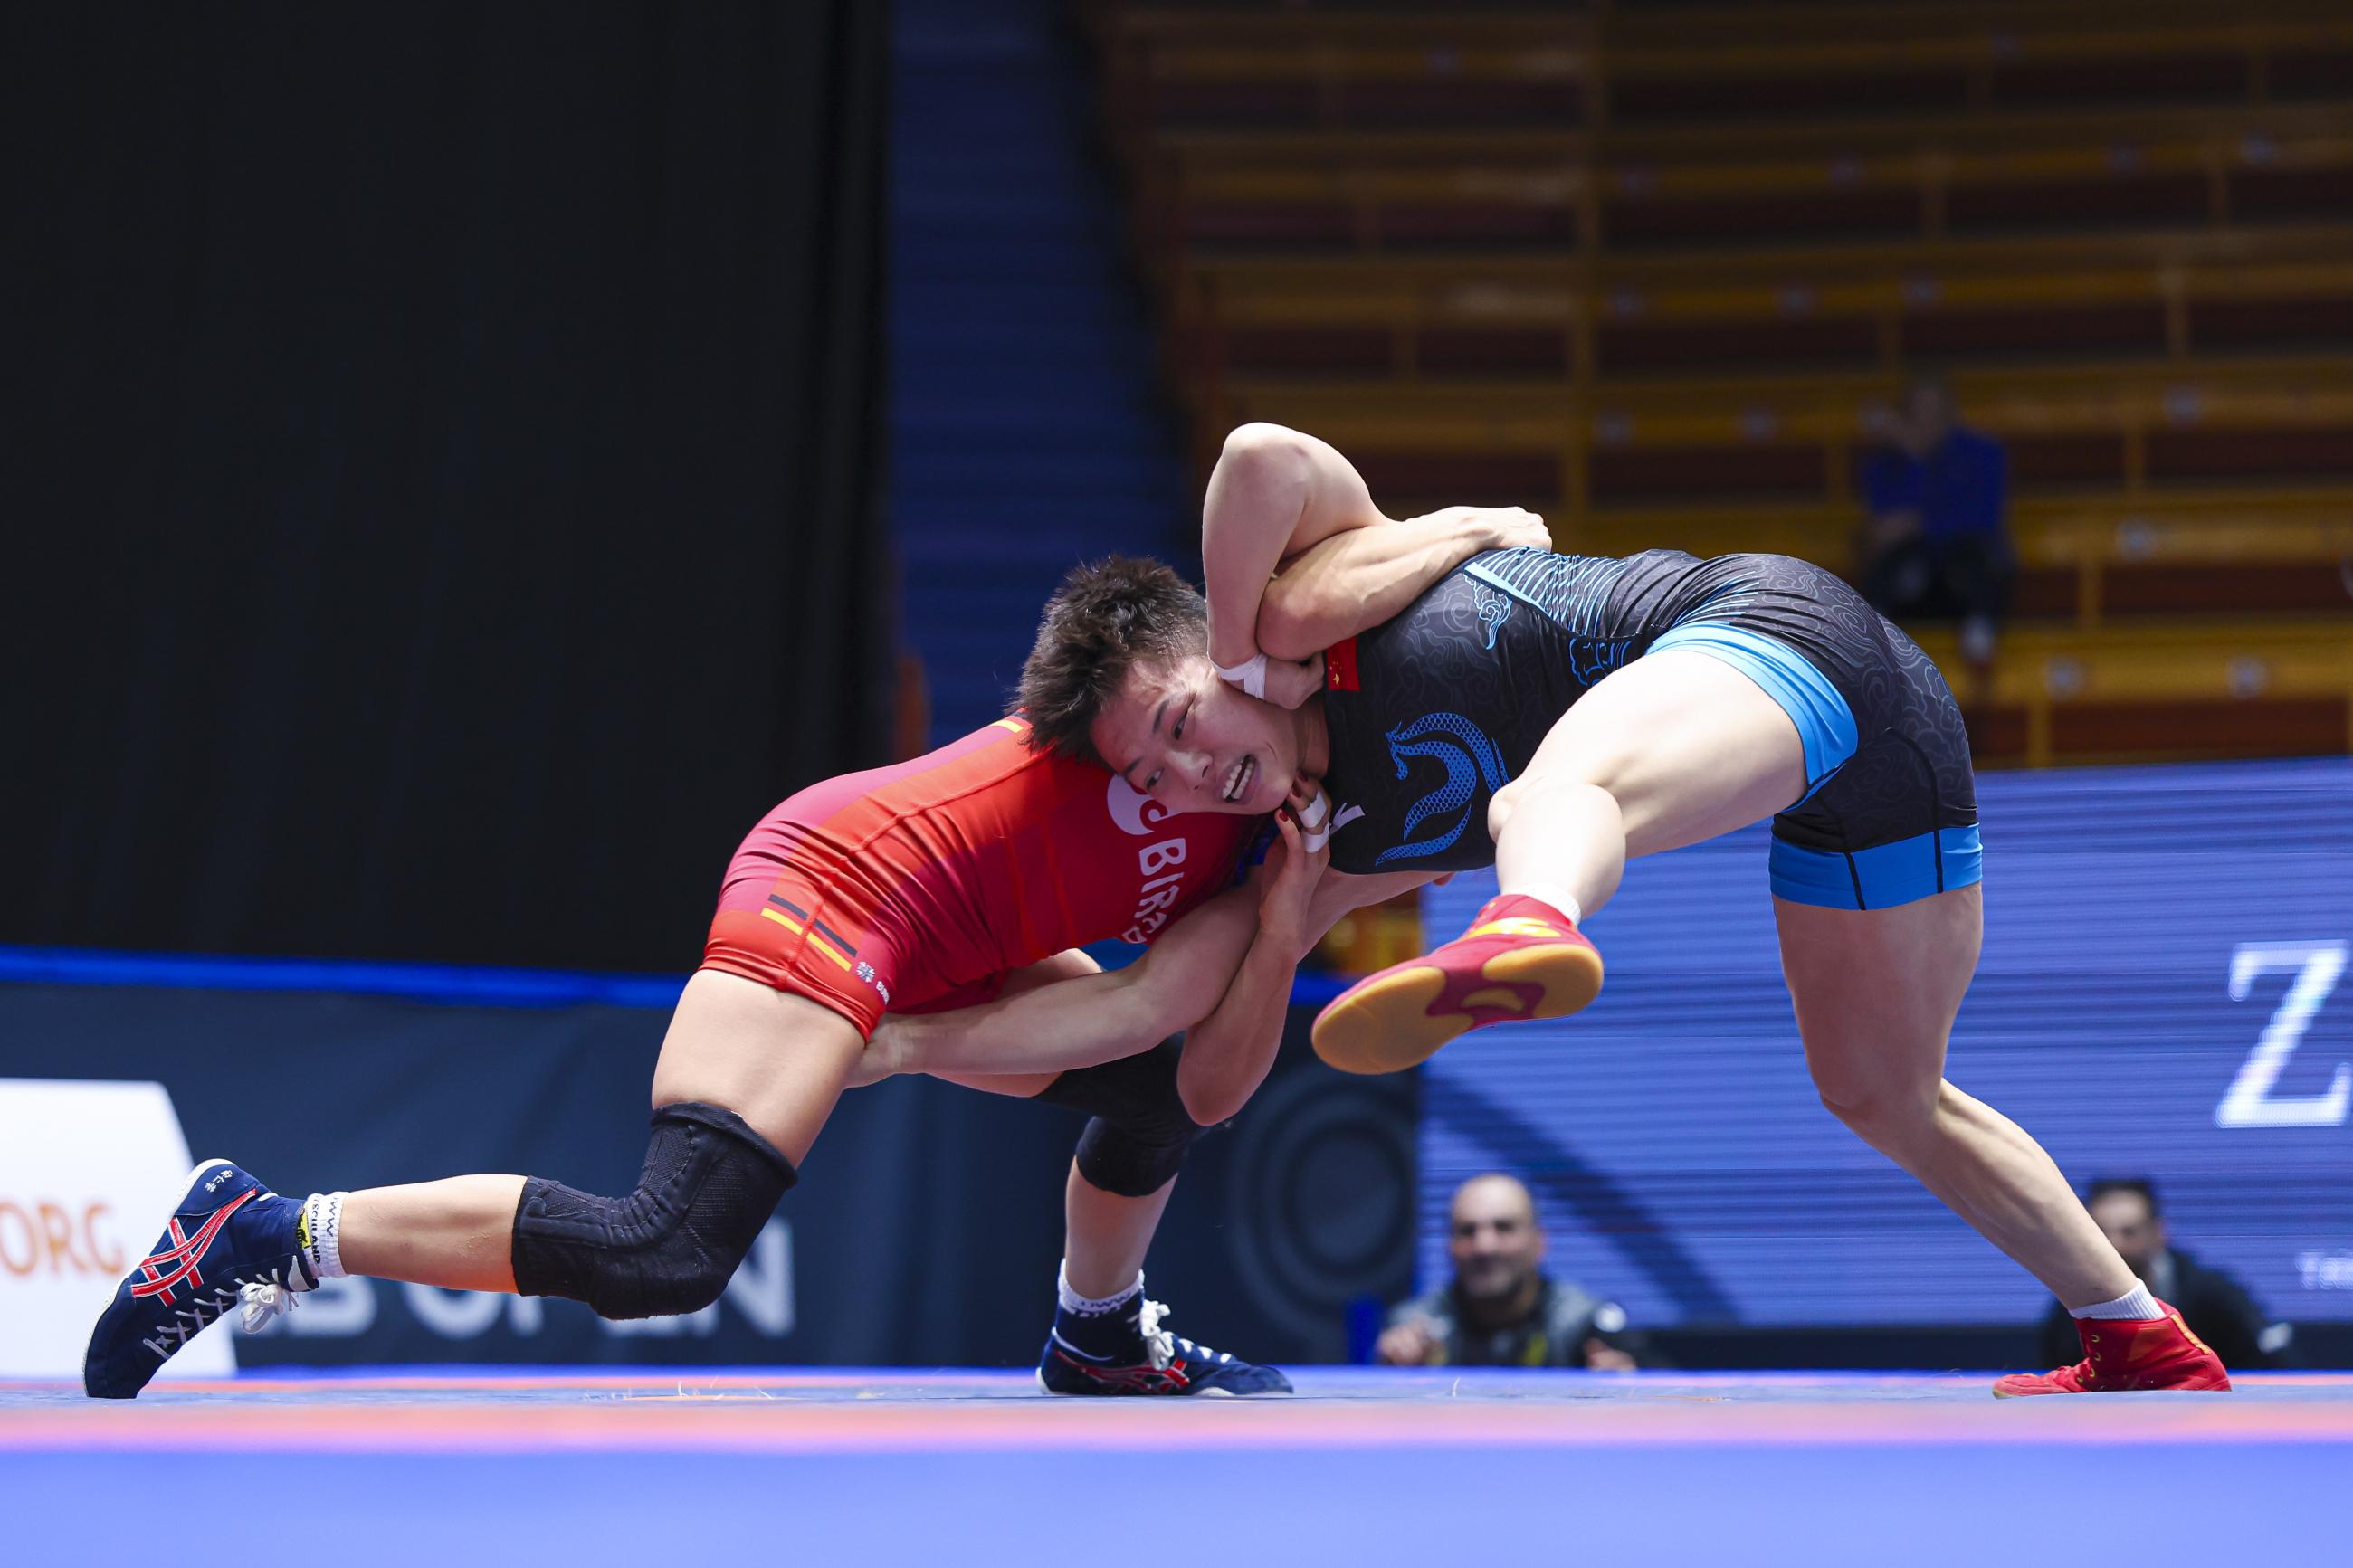 Ukrainians won two more "gold" medals at the wrestling tournament in Zagreb